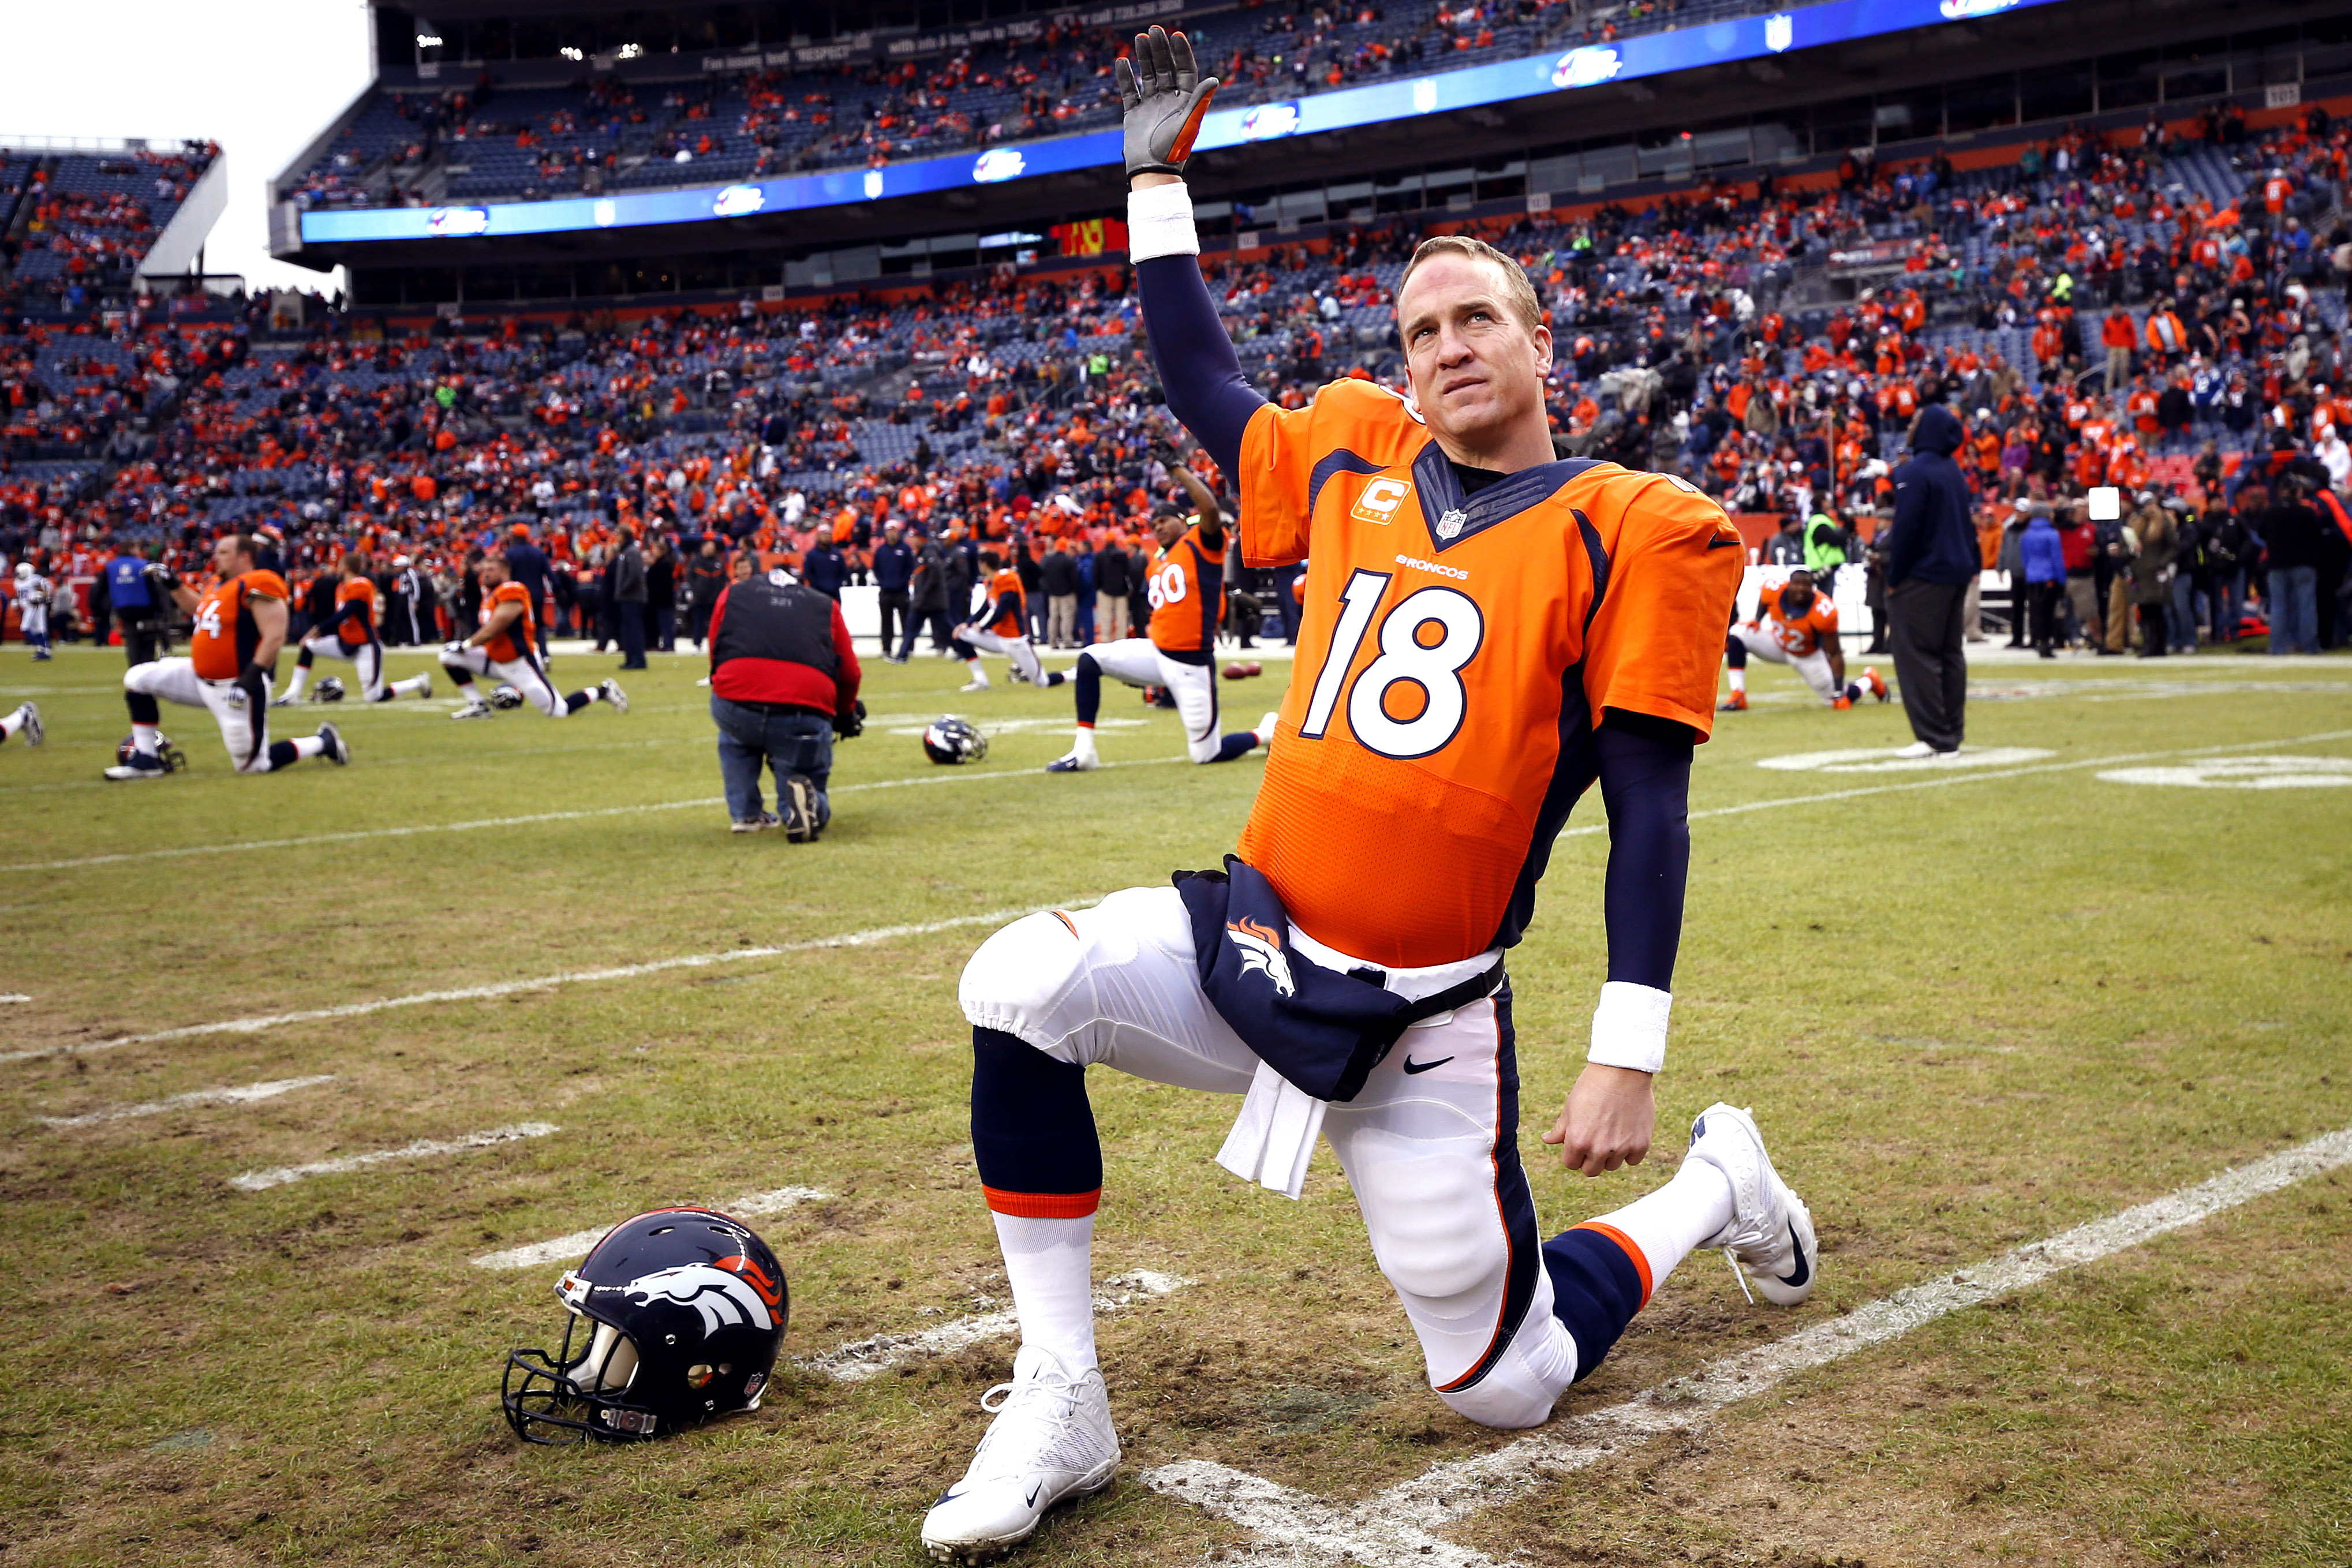 Denver Broncos quarterback Peyton Manning (18) stretches prior to an NFL divisional playoff football game against the Indianapolis Colts , Sunday, Jan. 11, 2015, in Denver. (AP Photo/Jack Dempsey)